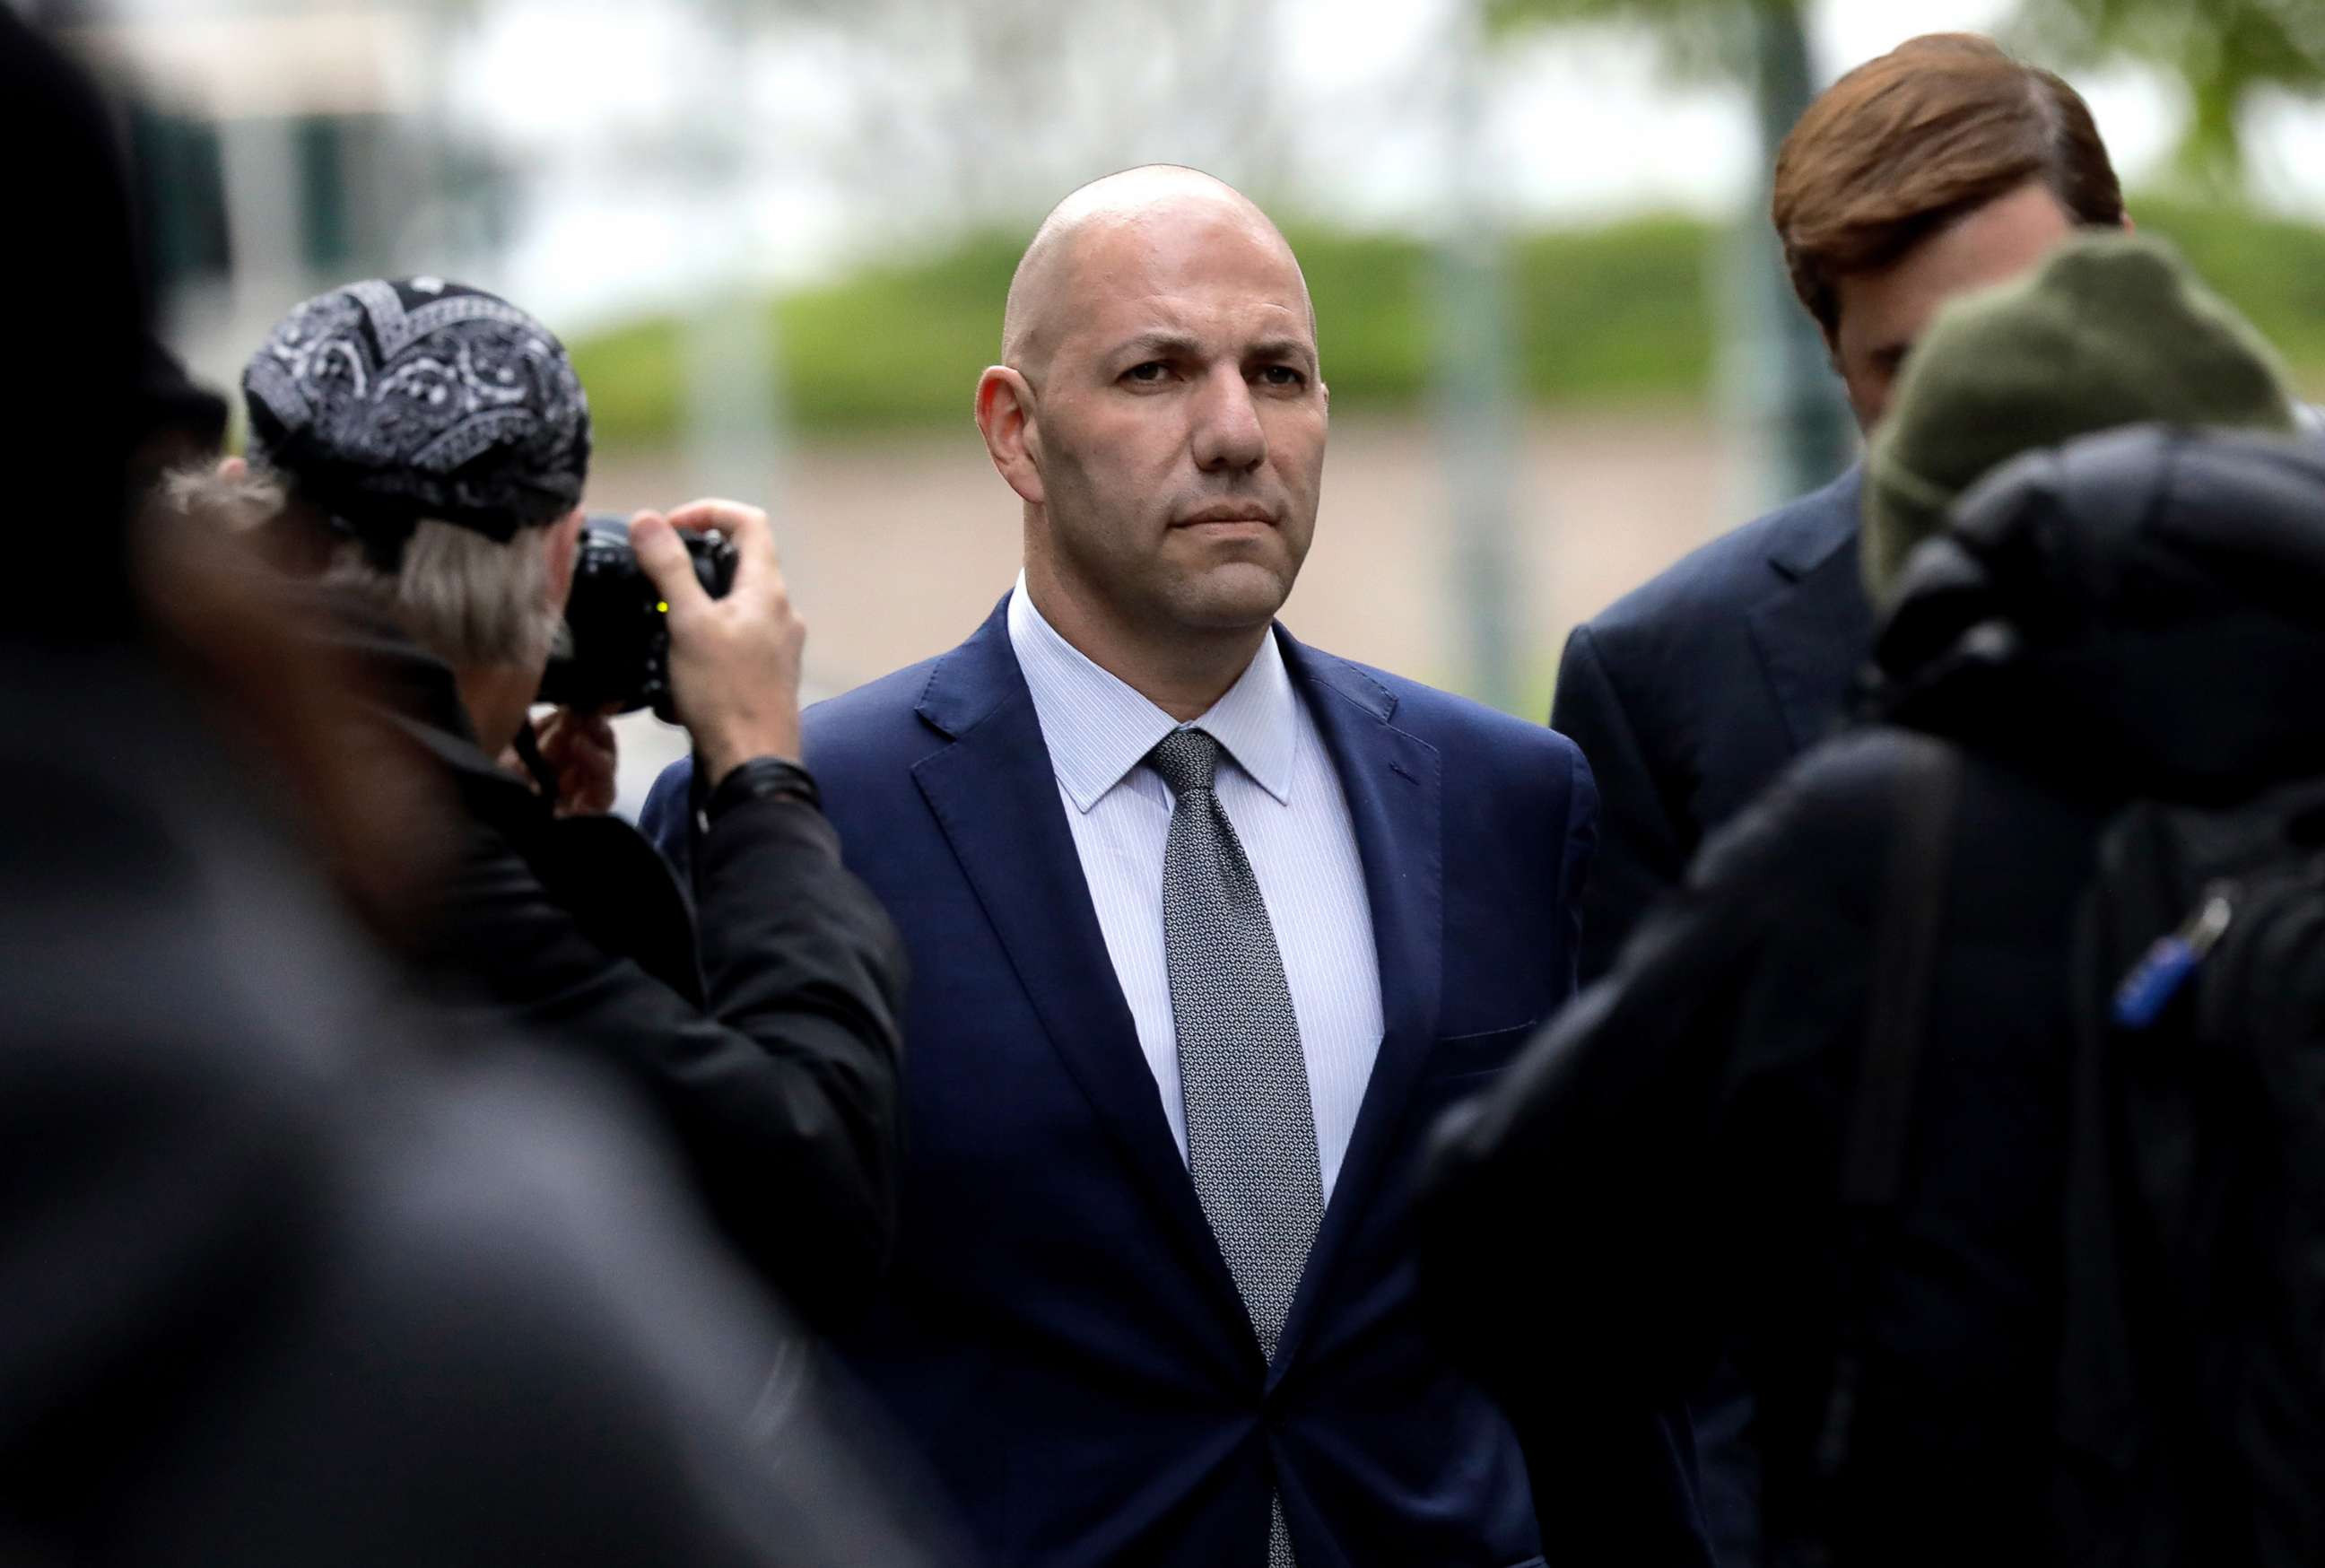 PHOTO: David Correia leaves federal court in New York, Oct. 17, 2019. Correia and Andrey Kukushkin were charged with illegally funneling foreign money into a U.S. political campaign.